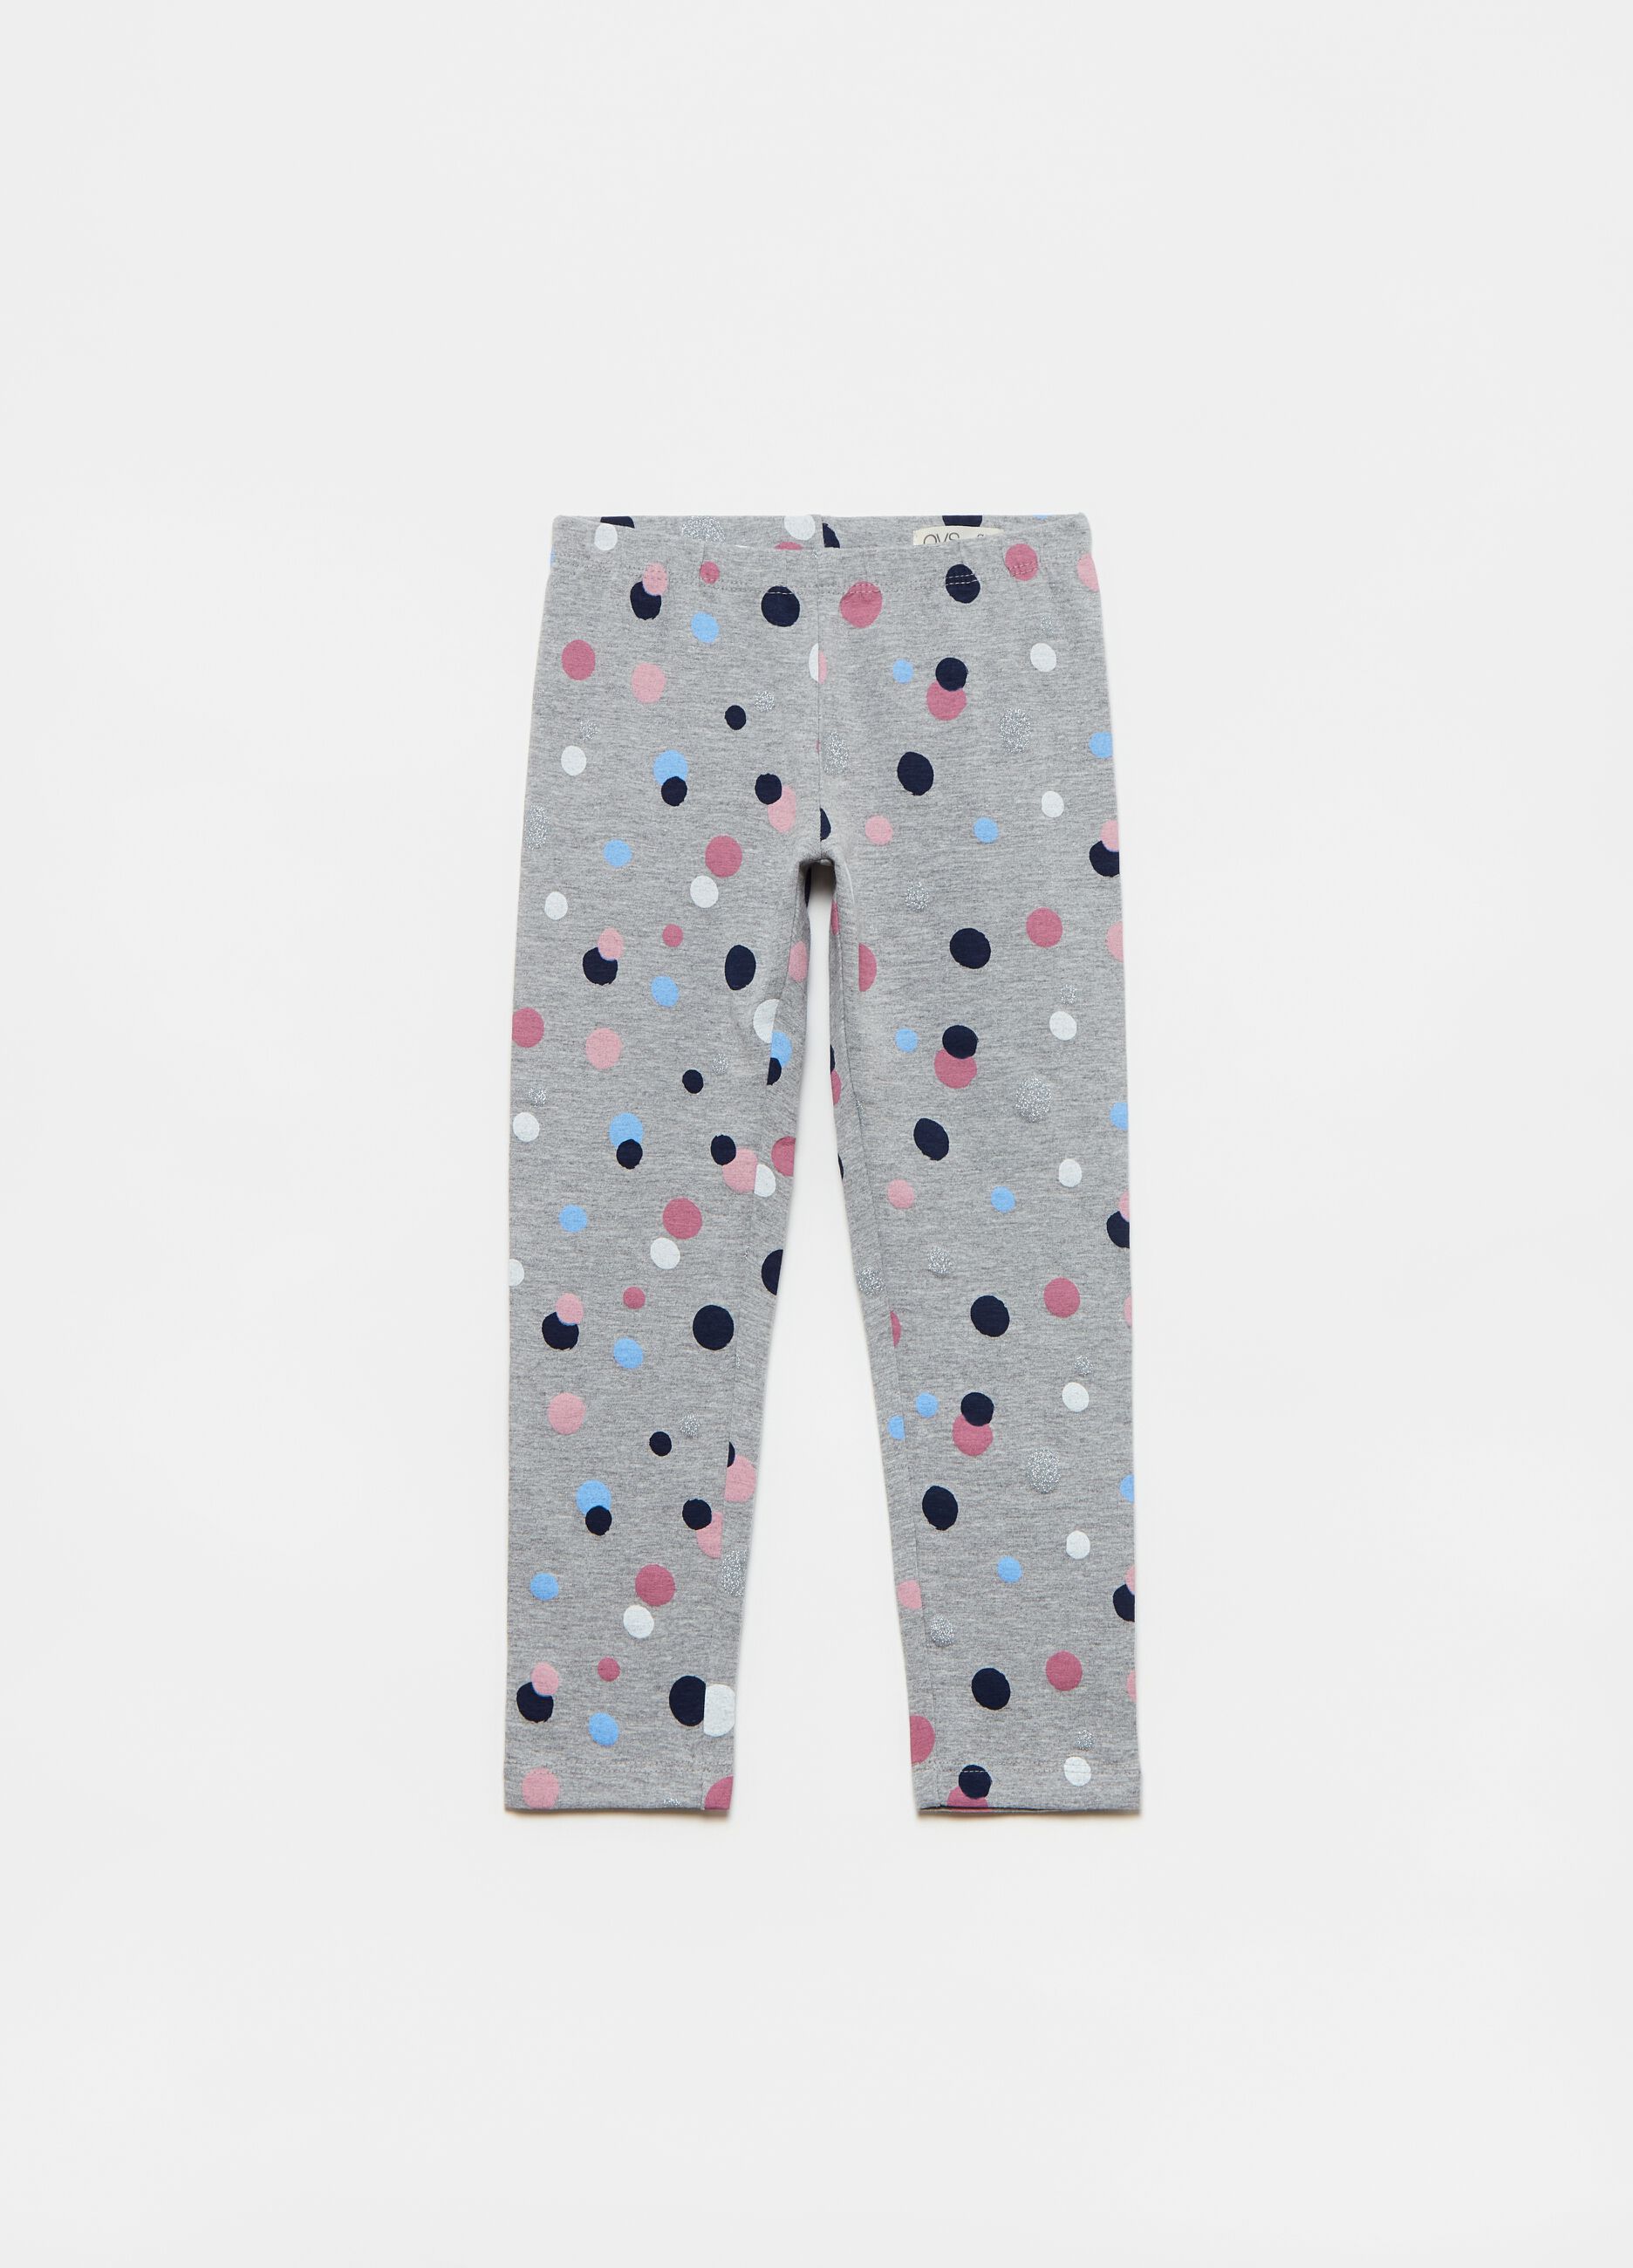 Stretch leggings with polka dots and glitter